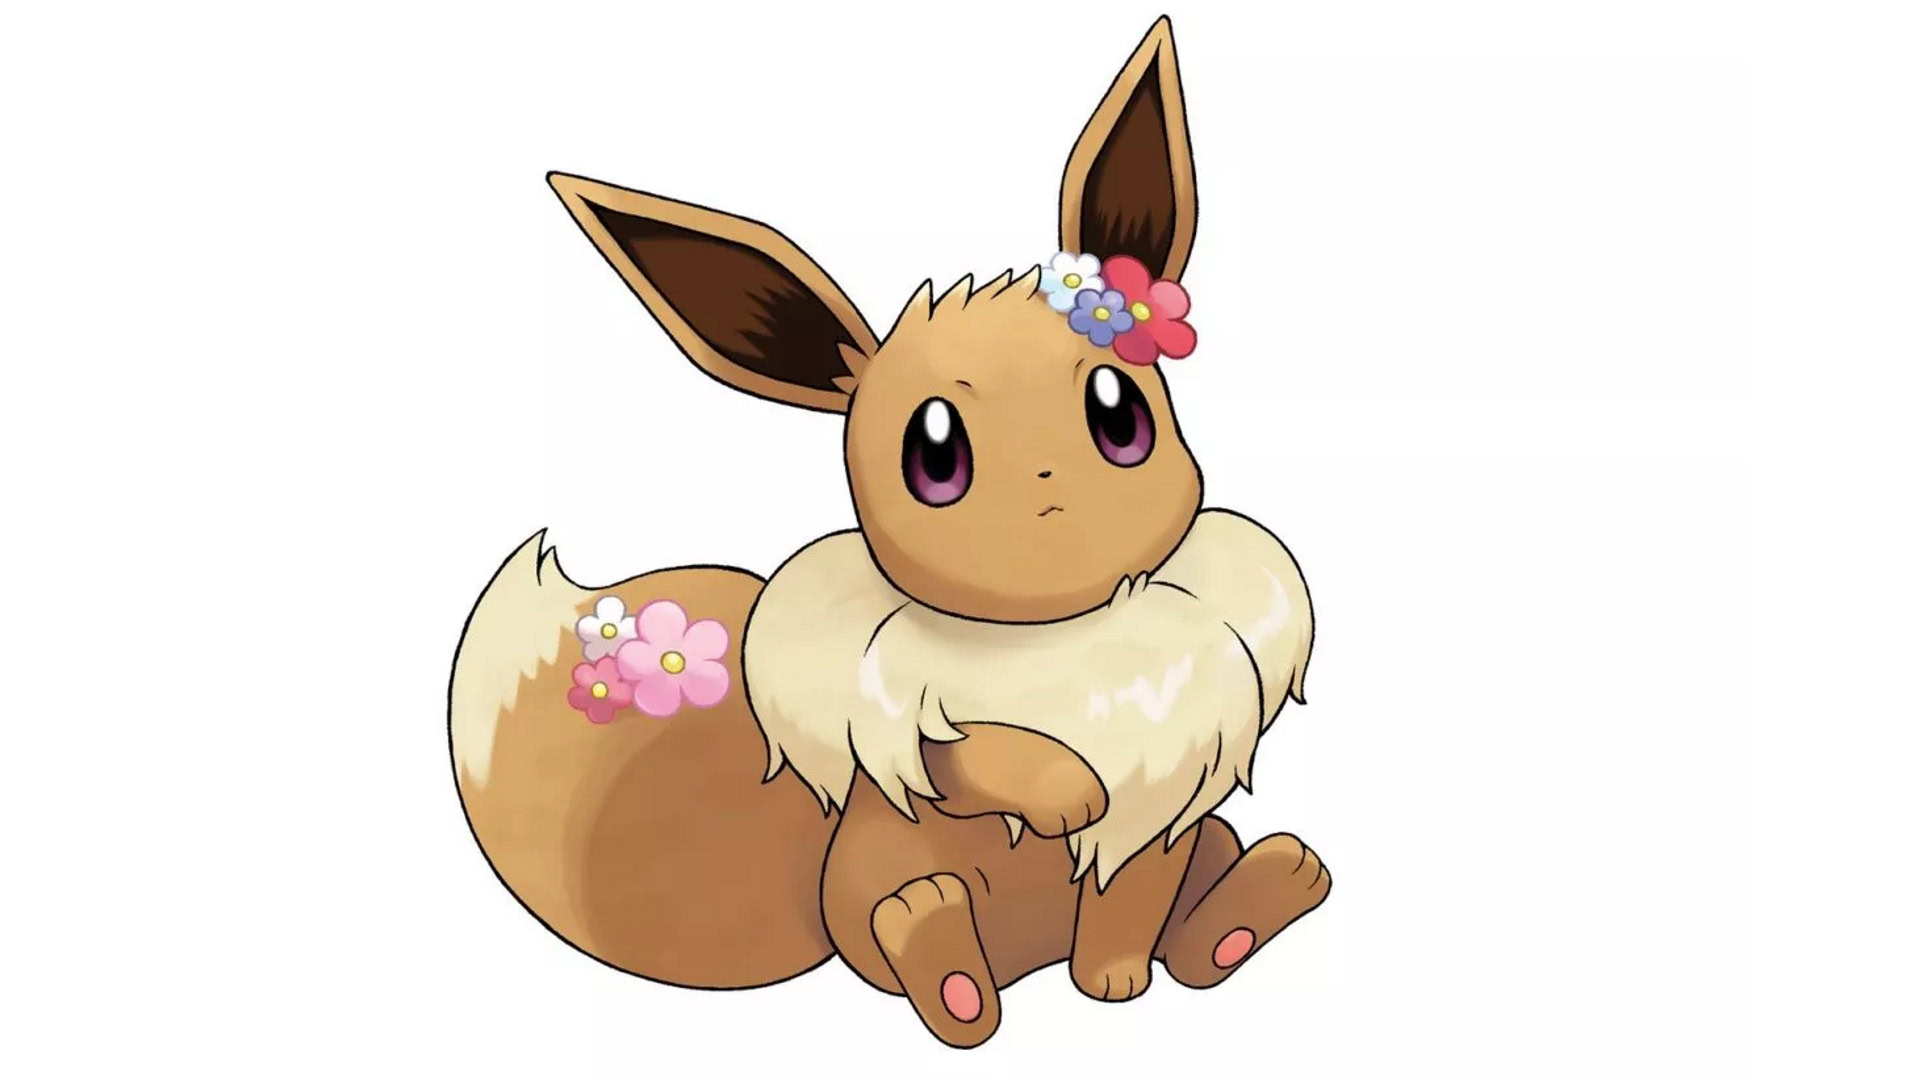 Pokemon Go' Eevee Evolutions: 2 Steps to Guarantee You'll Get a Sylveon!